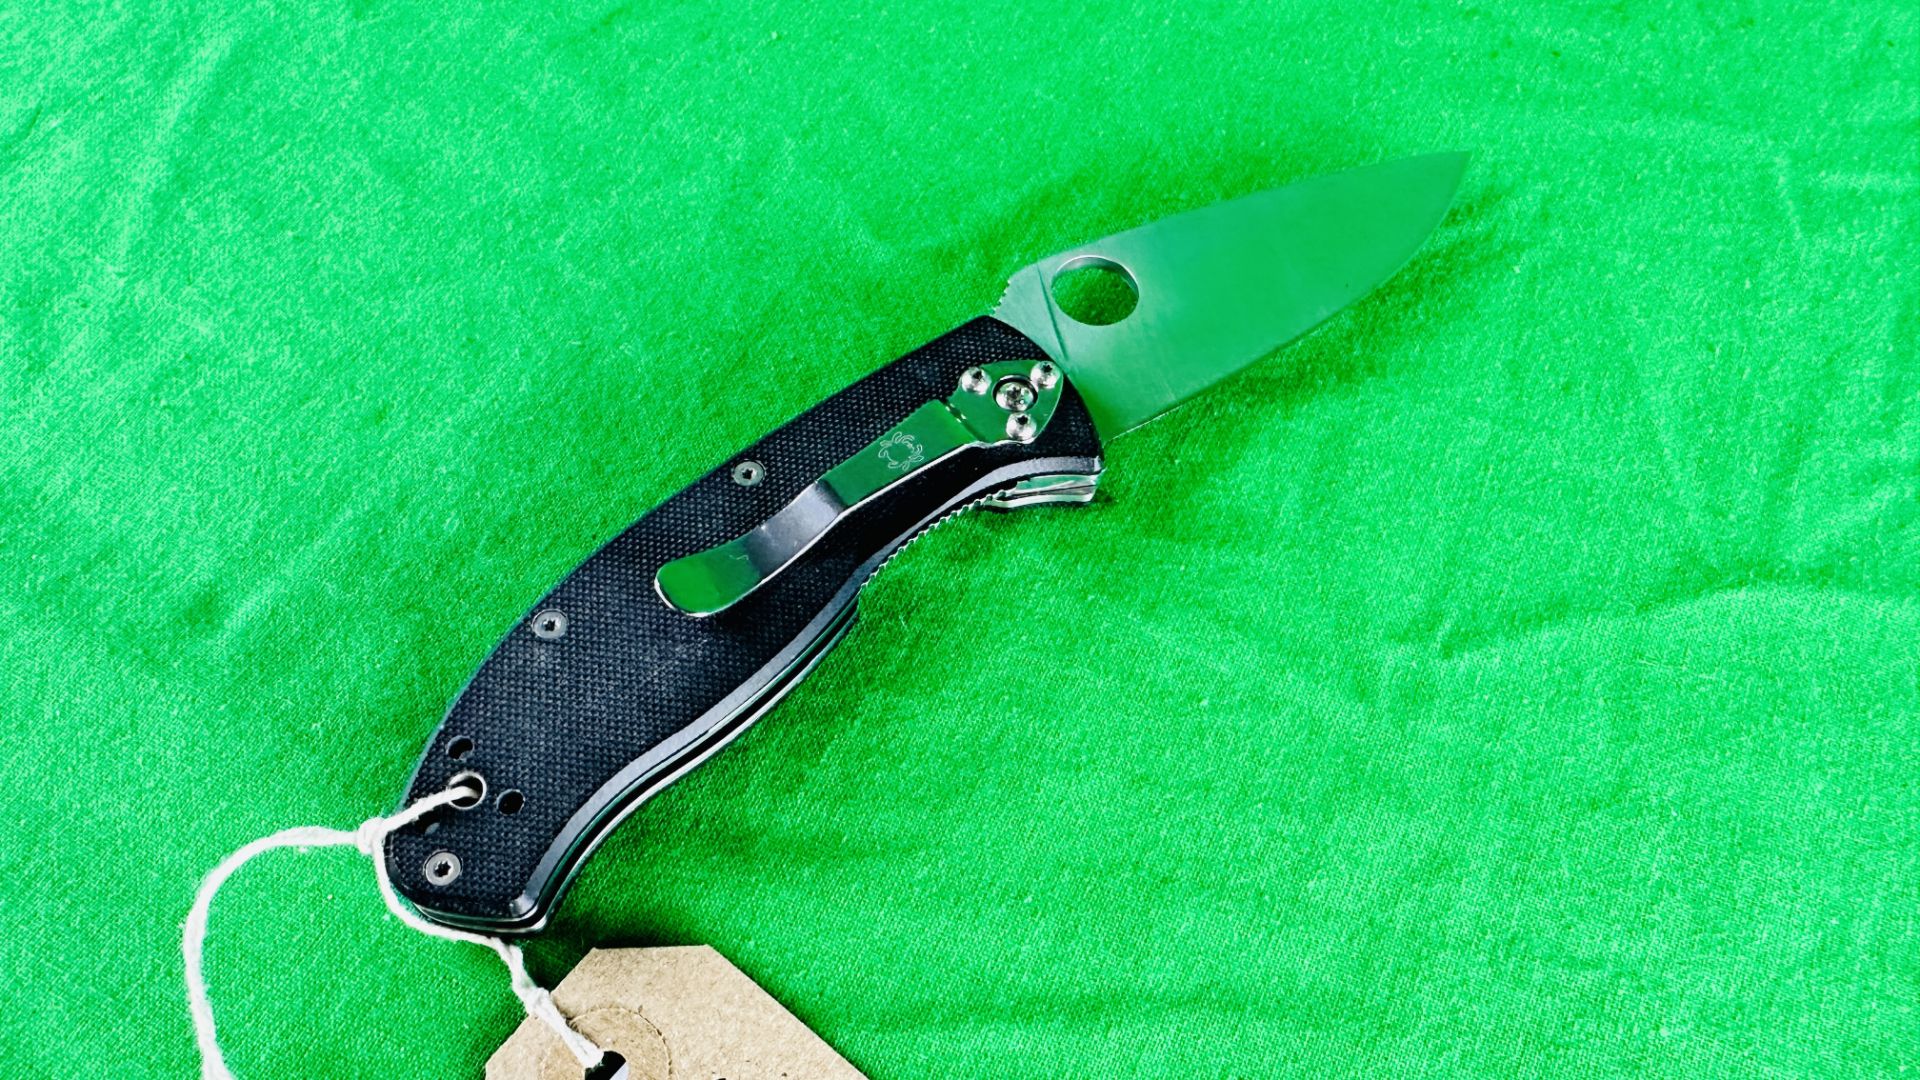 SPYDERCO TENACIOUS C122GP FOLDING POCKET LOCK KNIFE - NO POSTAGE OR PACKING AVAILABLE - Image 6 of 7